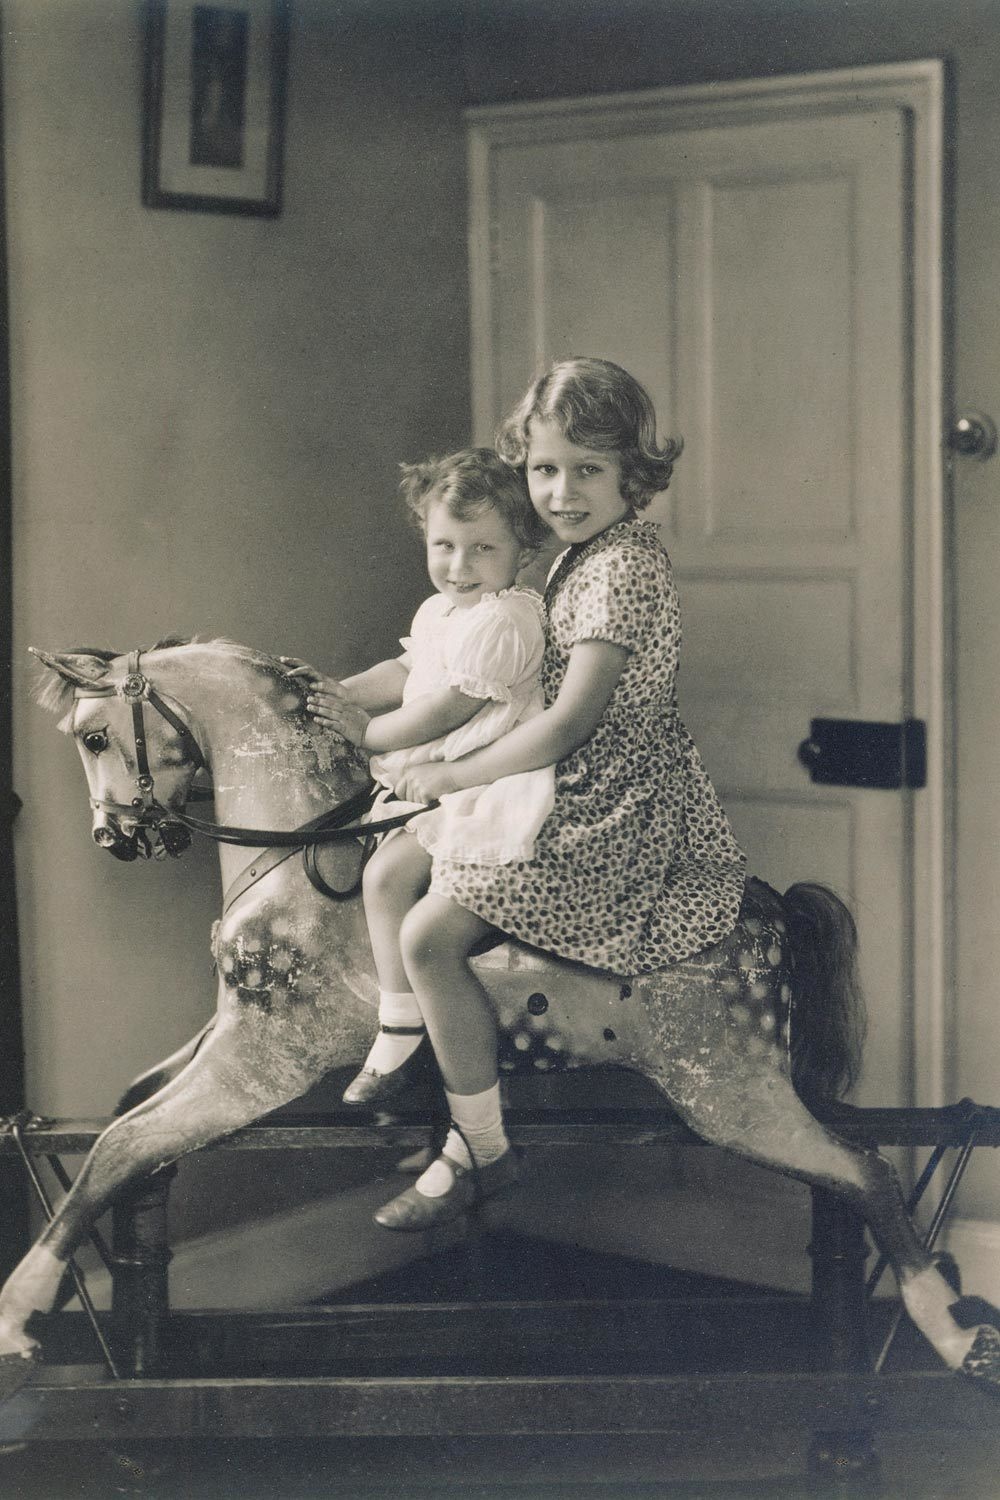 A very early photo of Princess Elizabeth and Princess Margaret, riding their rocking horse.